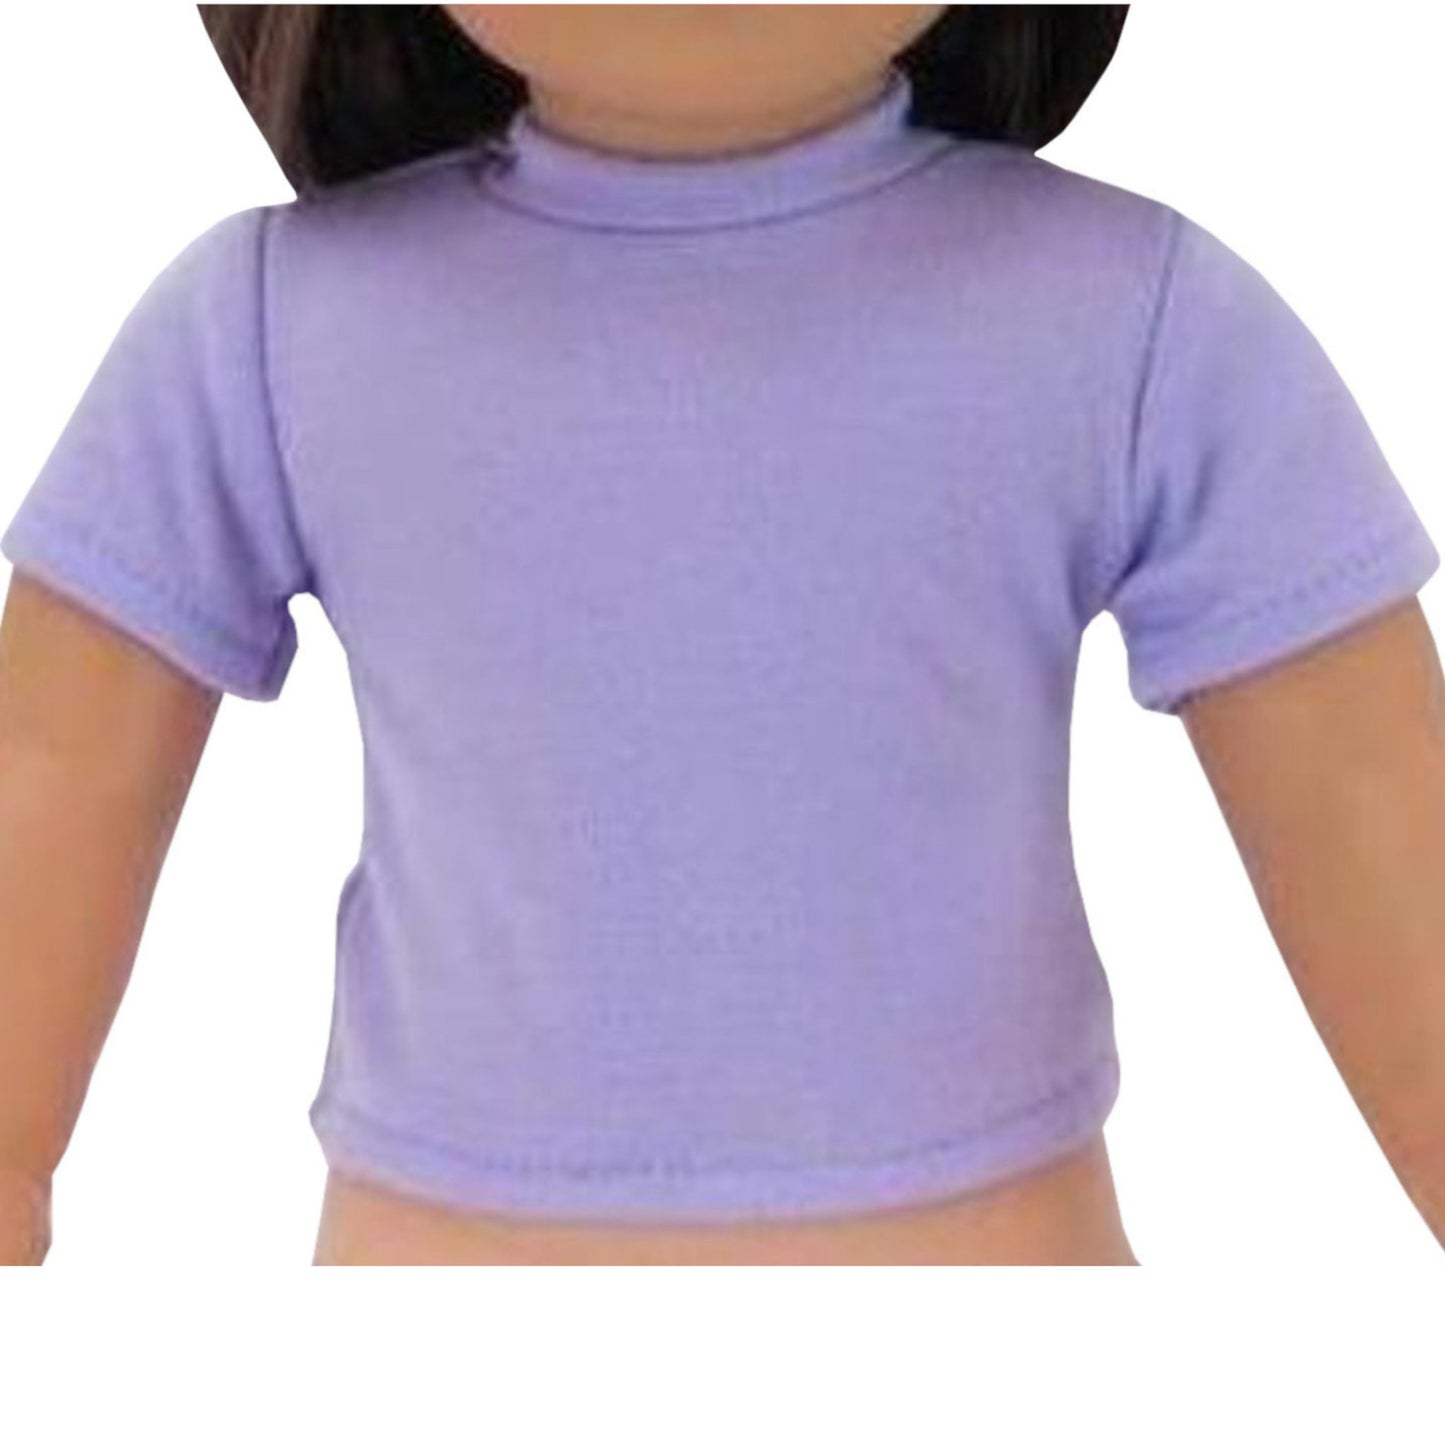 Lavender T-Sjort fpr 18-inch dolls with doll